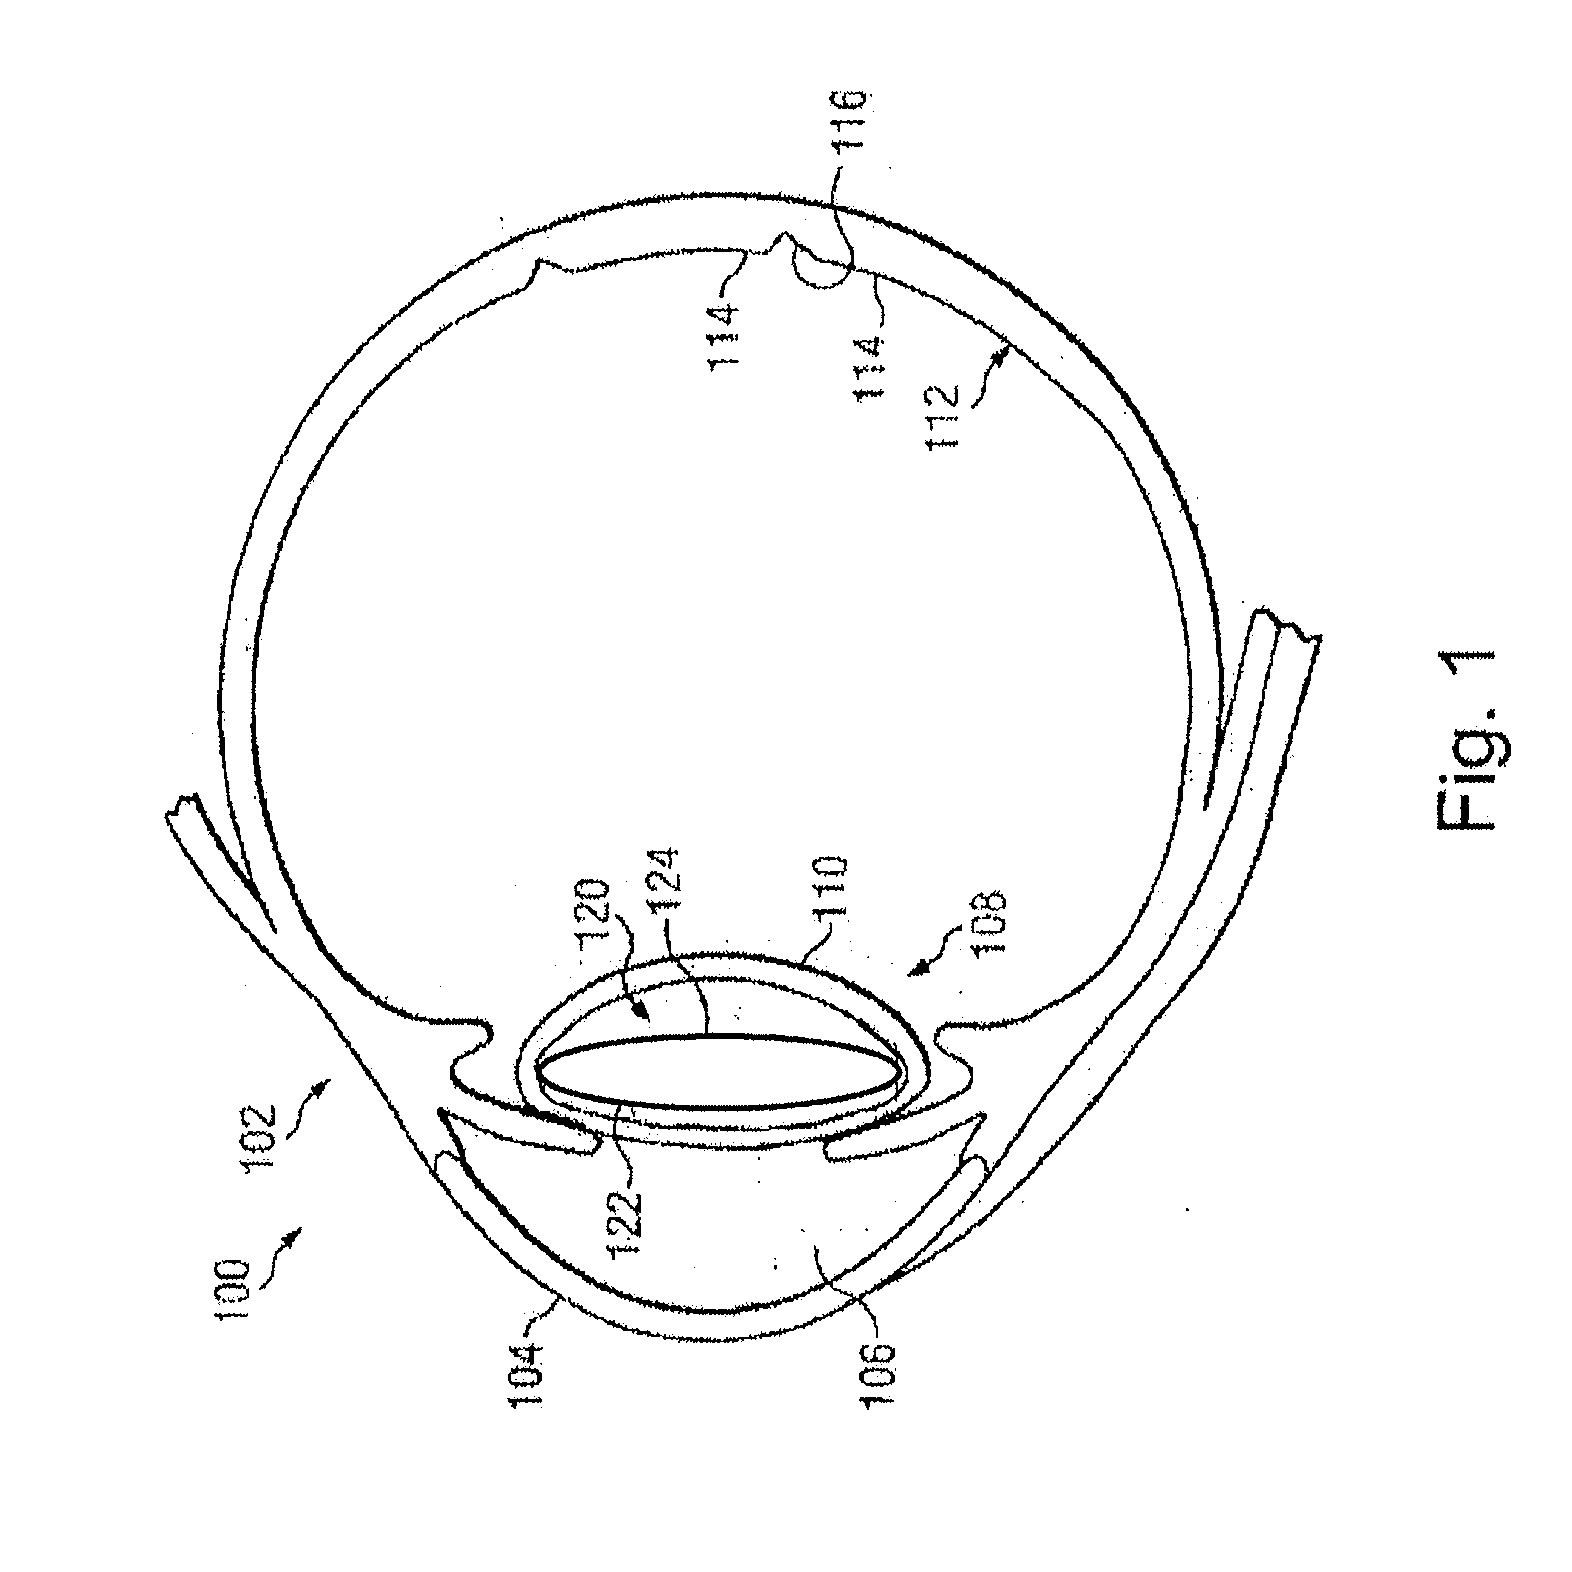 Aspheric optical lenses and associated systems and methods